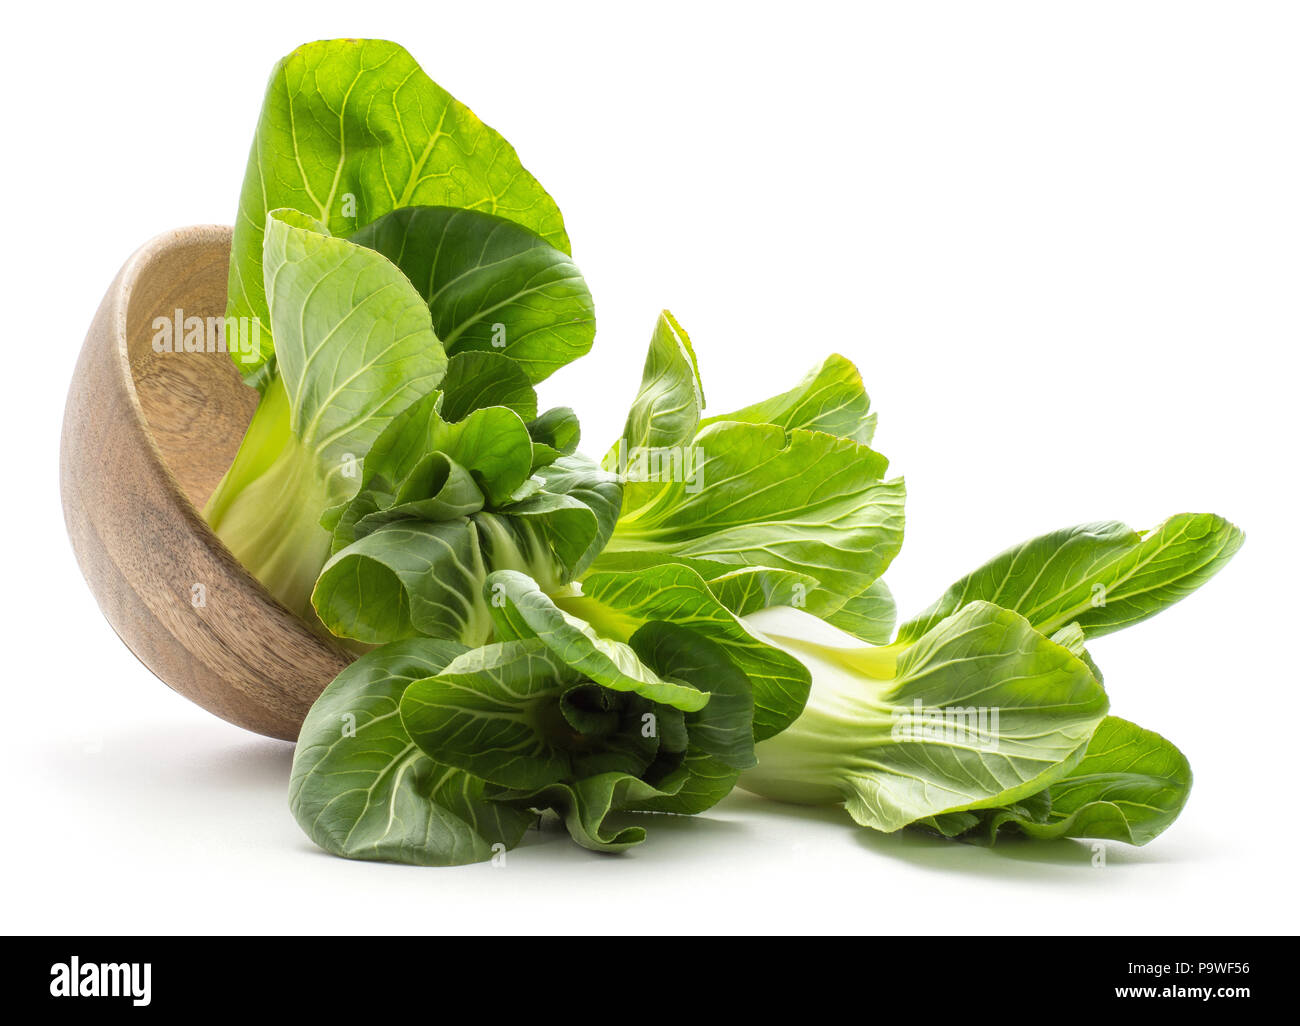 Fresh bok choy (Pak choi) out a wooden bowl isolated on white background Stock Photo